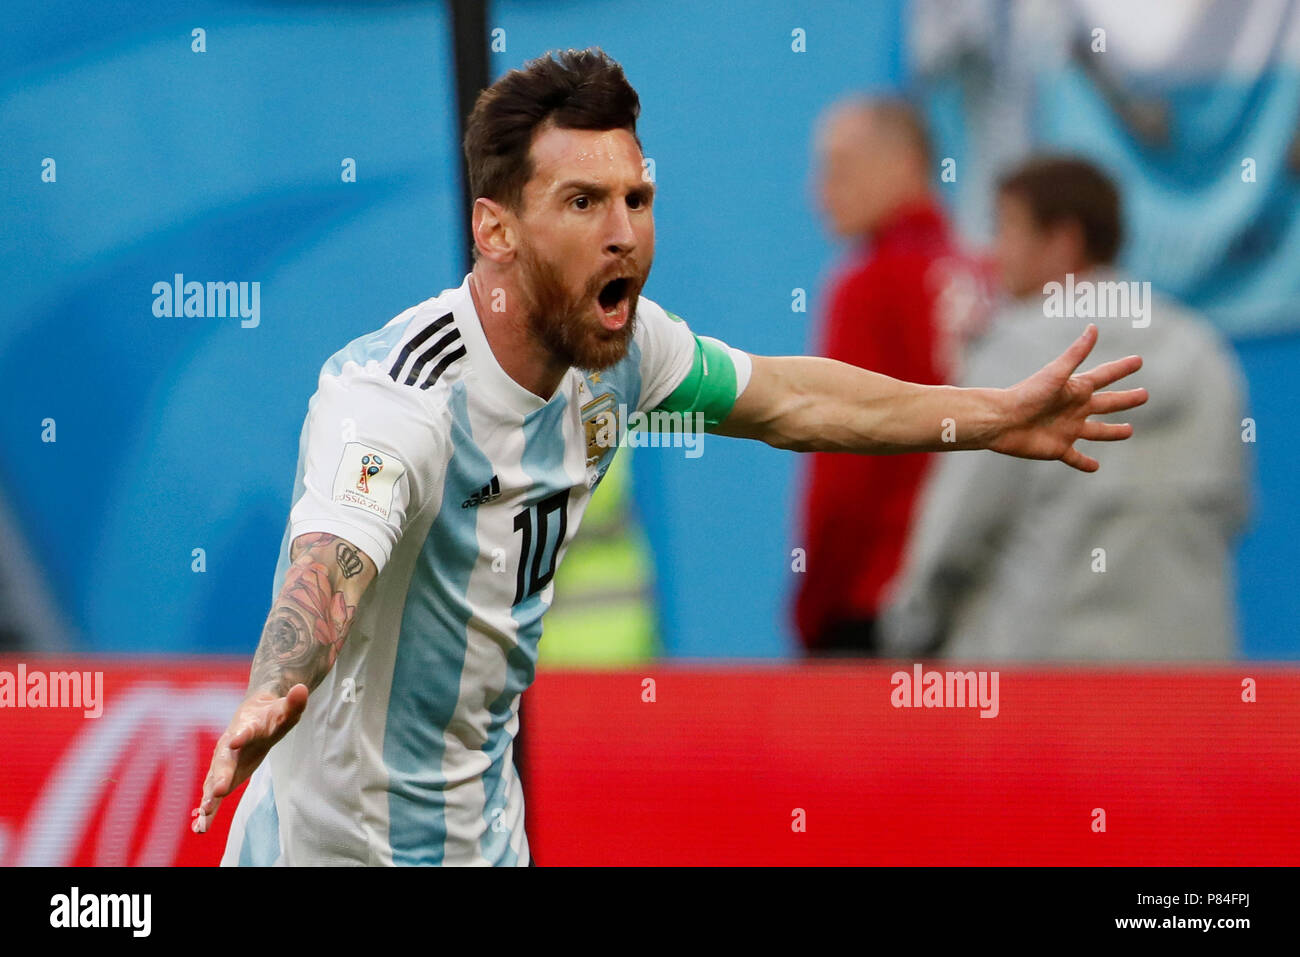 SAINT PETERSBURG, RUSSIA - JUNE 26: Lionel Messi of Argentina national team celebrates his goal during the 2018 FIFA World Cup Russia group D match between Nigeria and Argentina at Saint Petersburg Stadium on June 26, 2018 in Saint Petersburg, Russia. (MB Media) Stock Photo